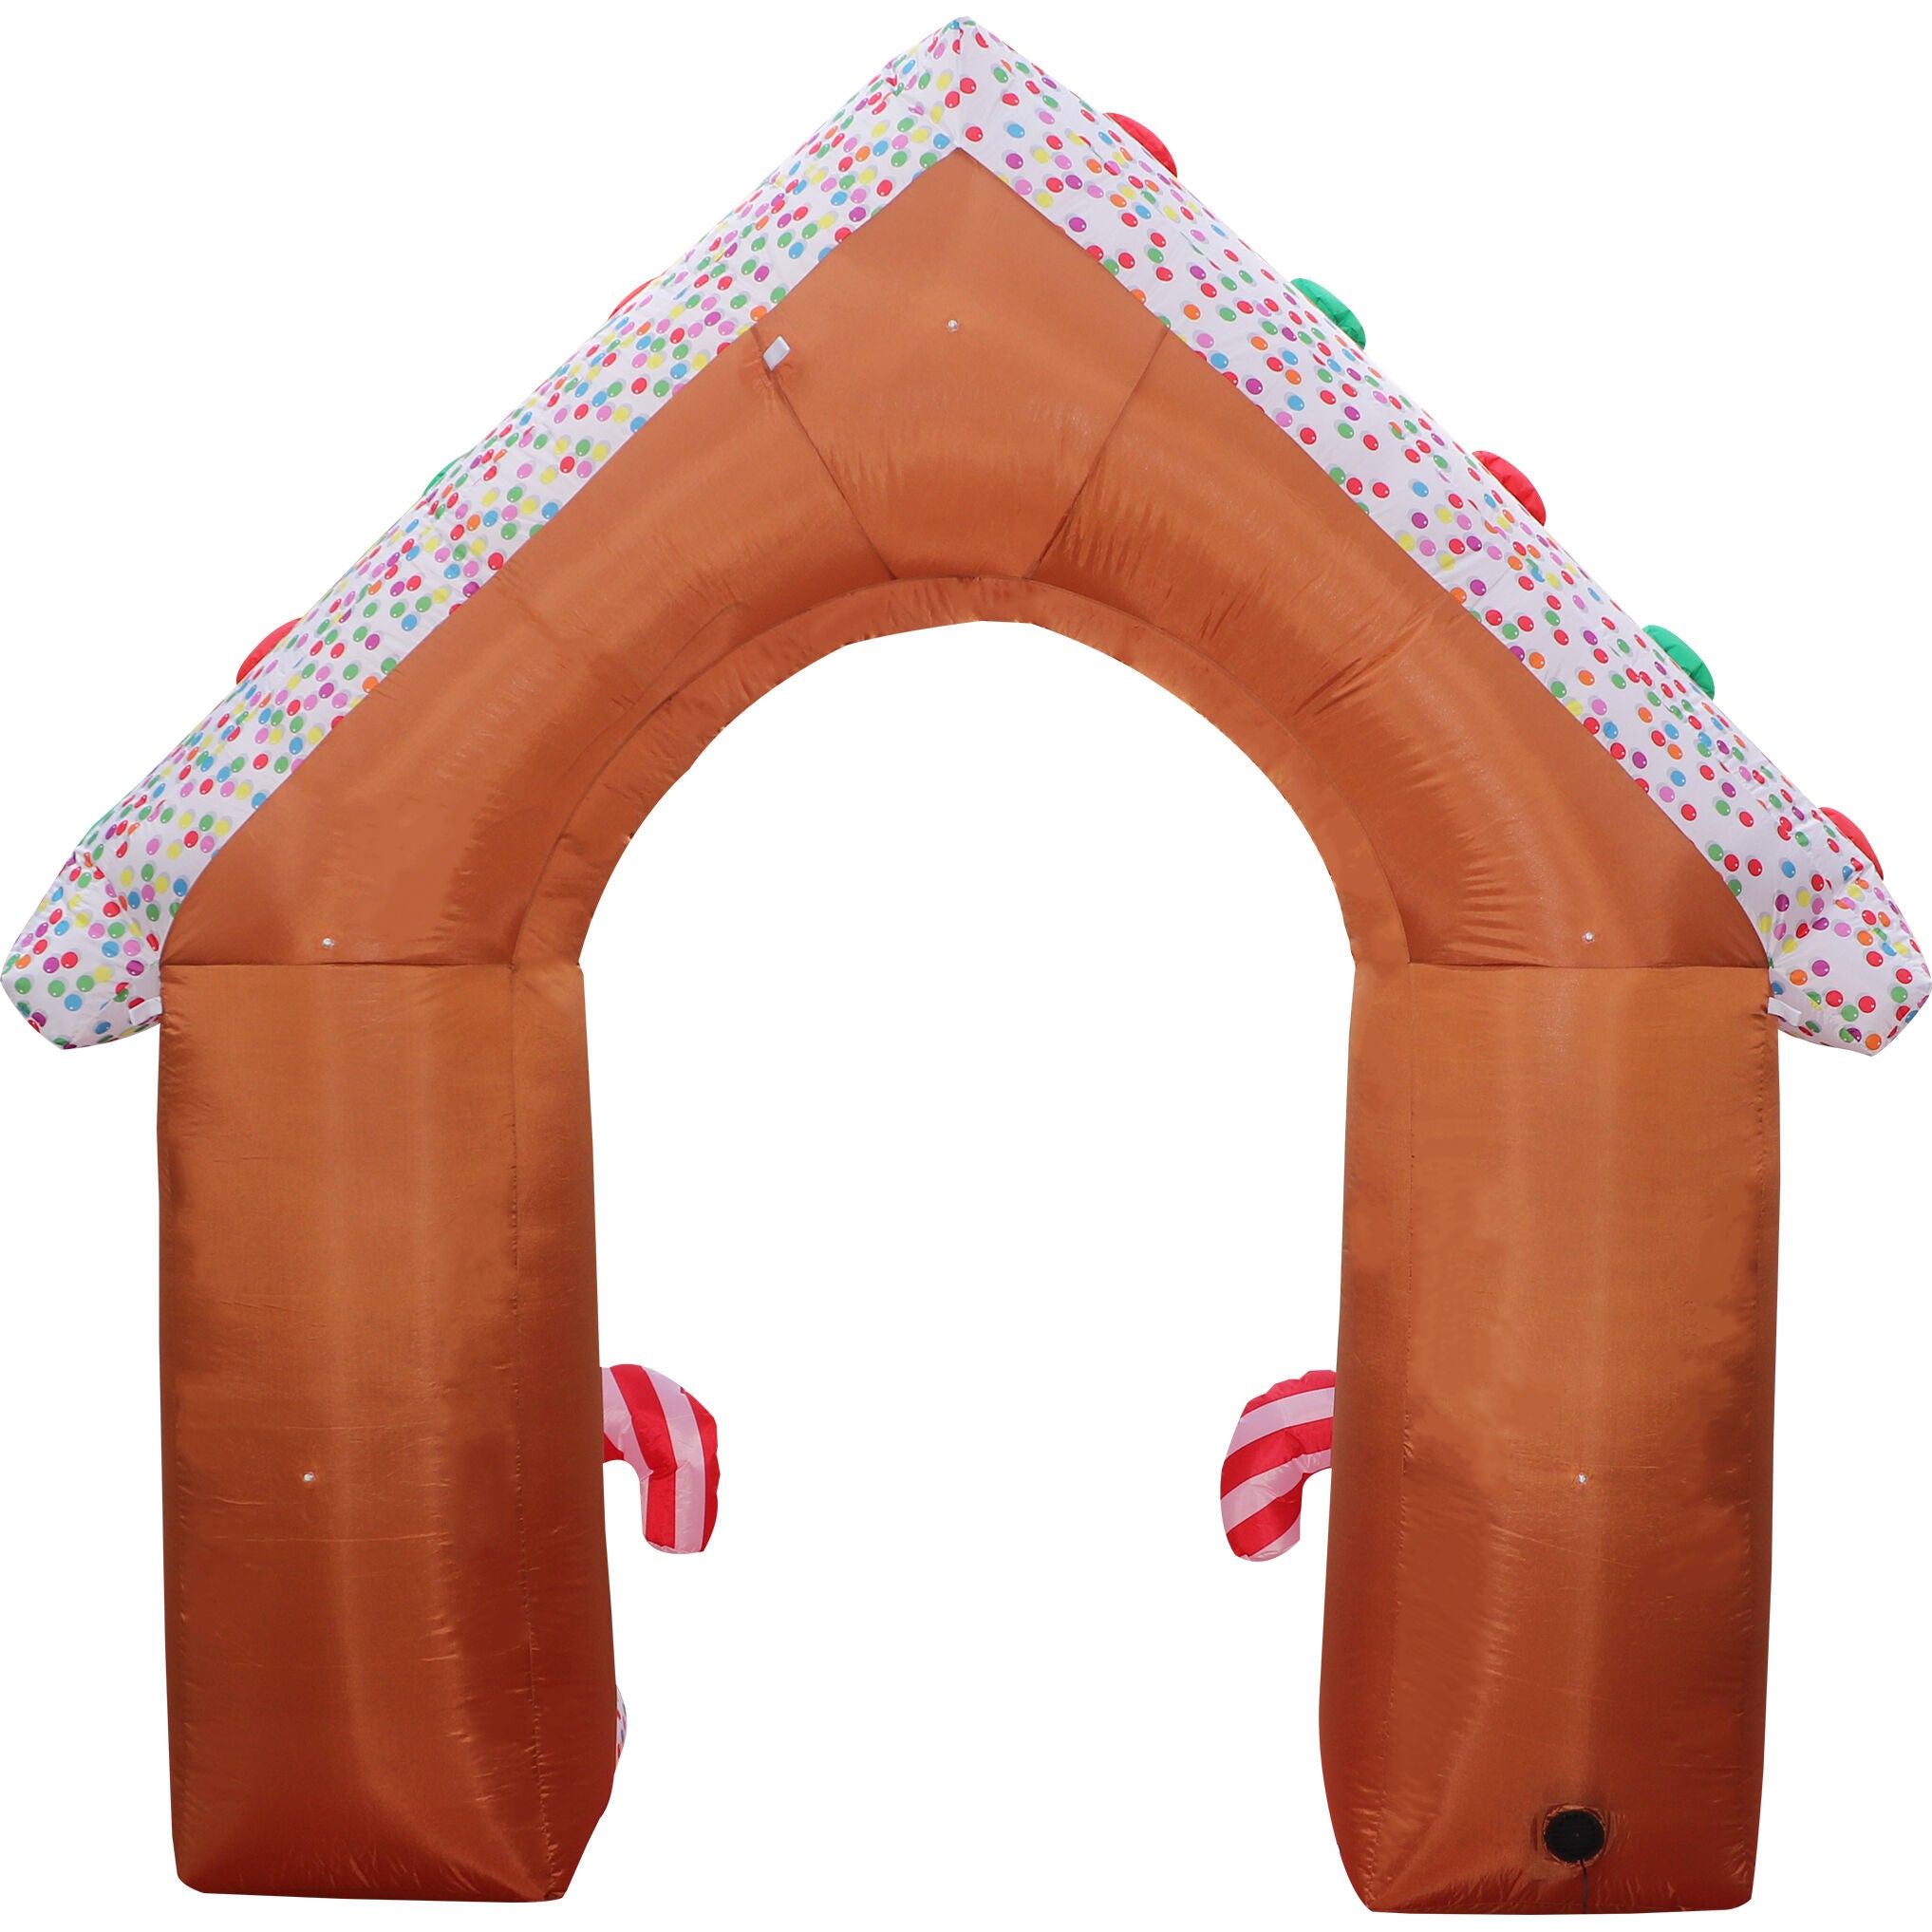 Fraser Hill Farm - 8-Ft. Tall Prelit Gingerbread Arch Inflatable